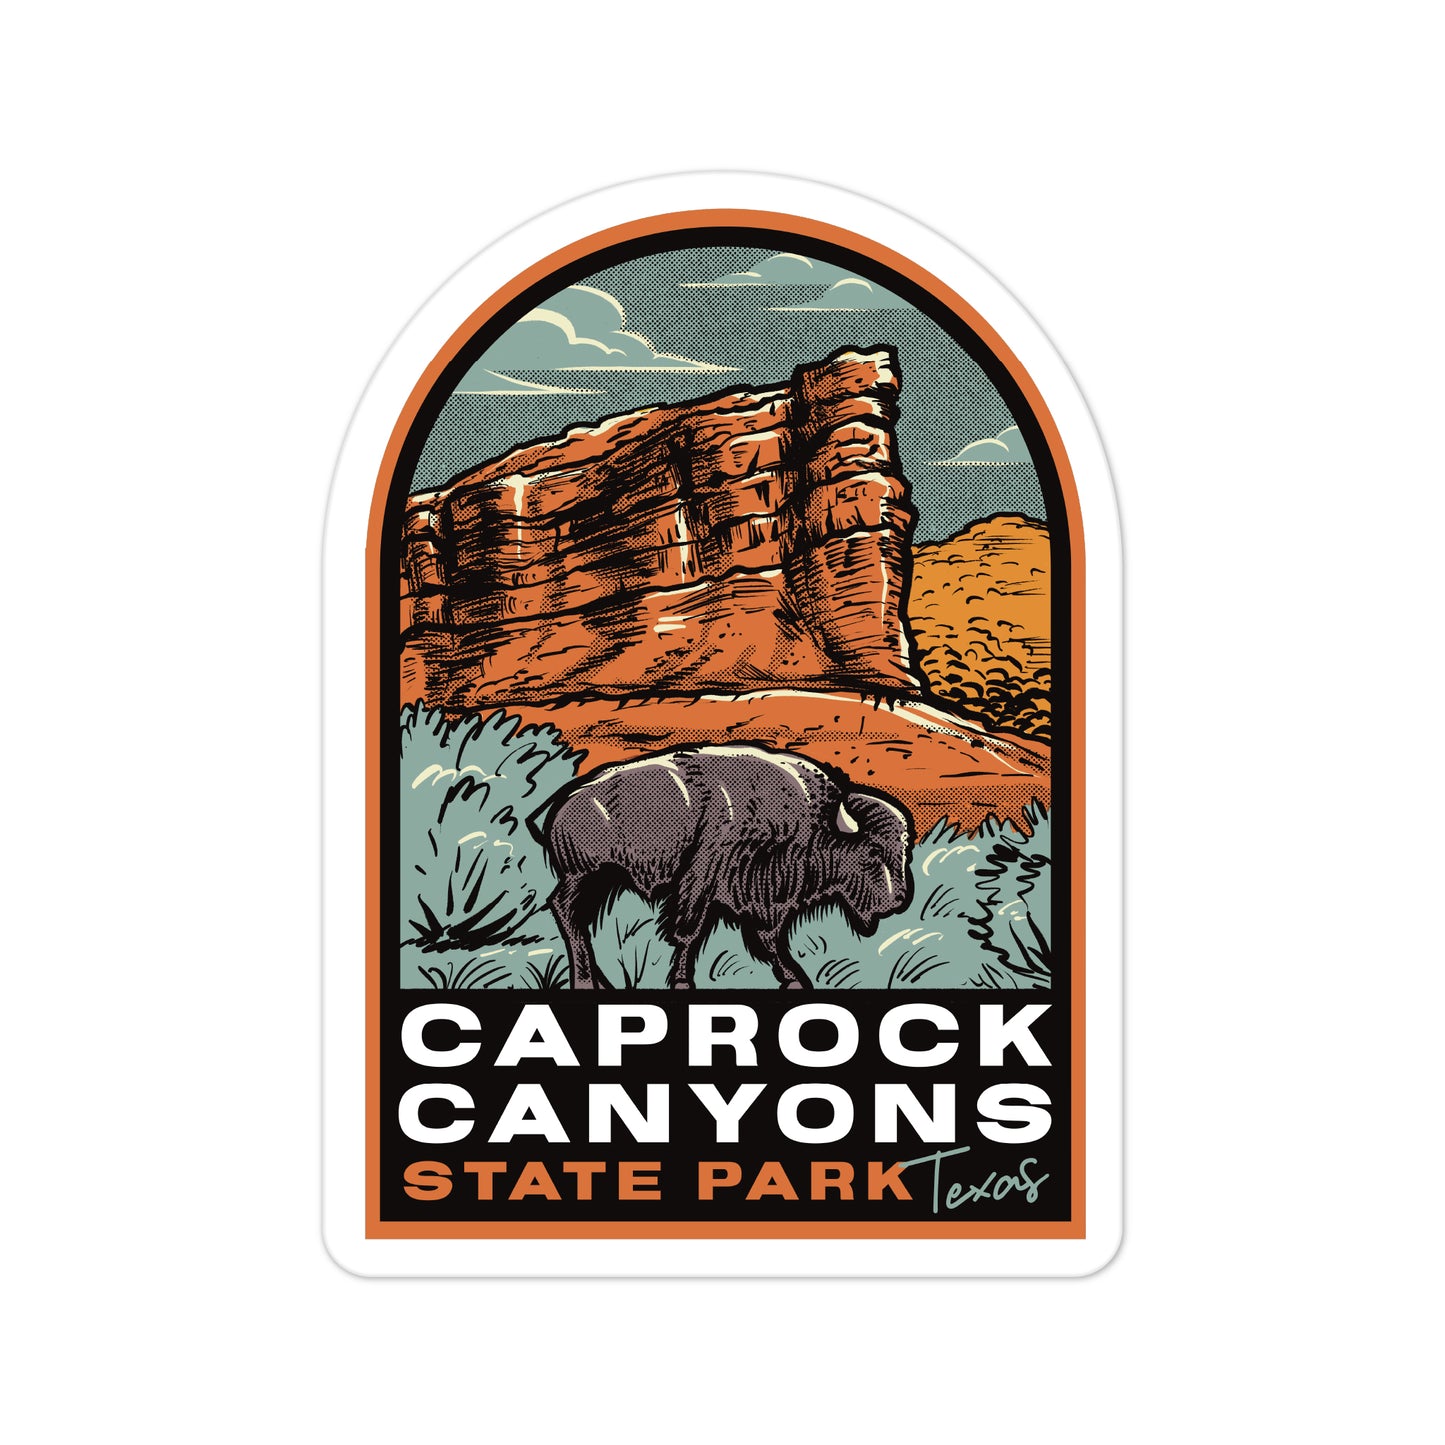 A sticker of Caprock Canyons State Park